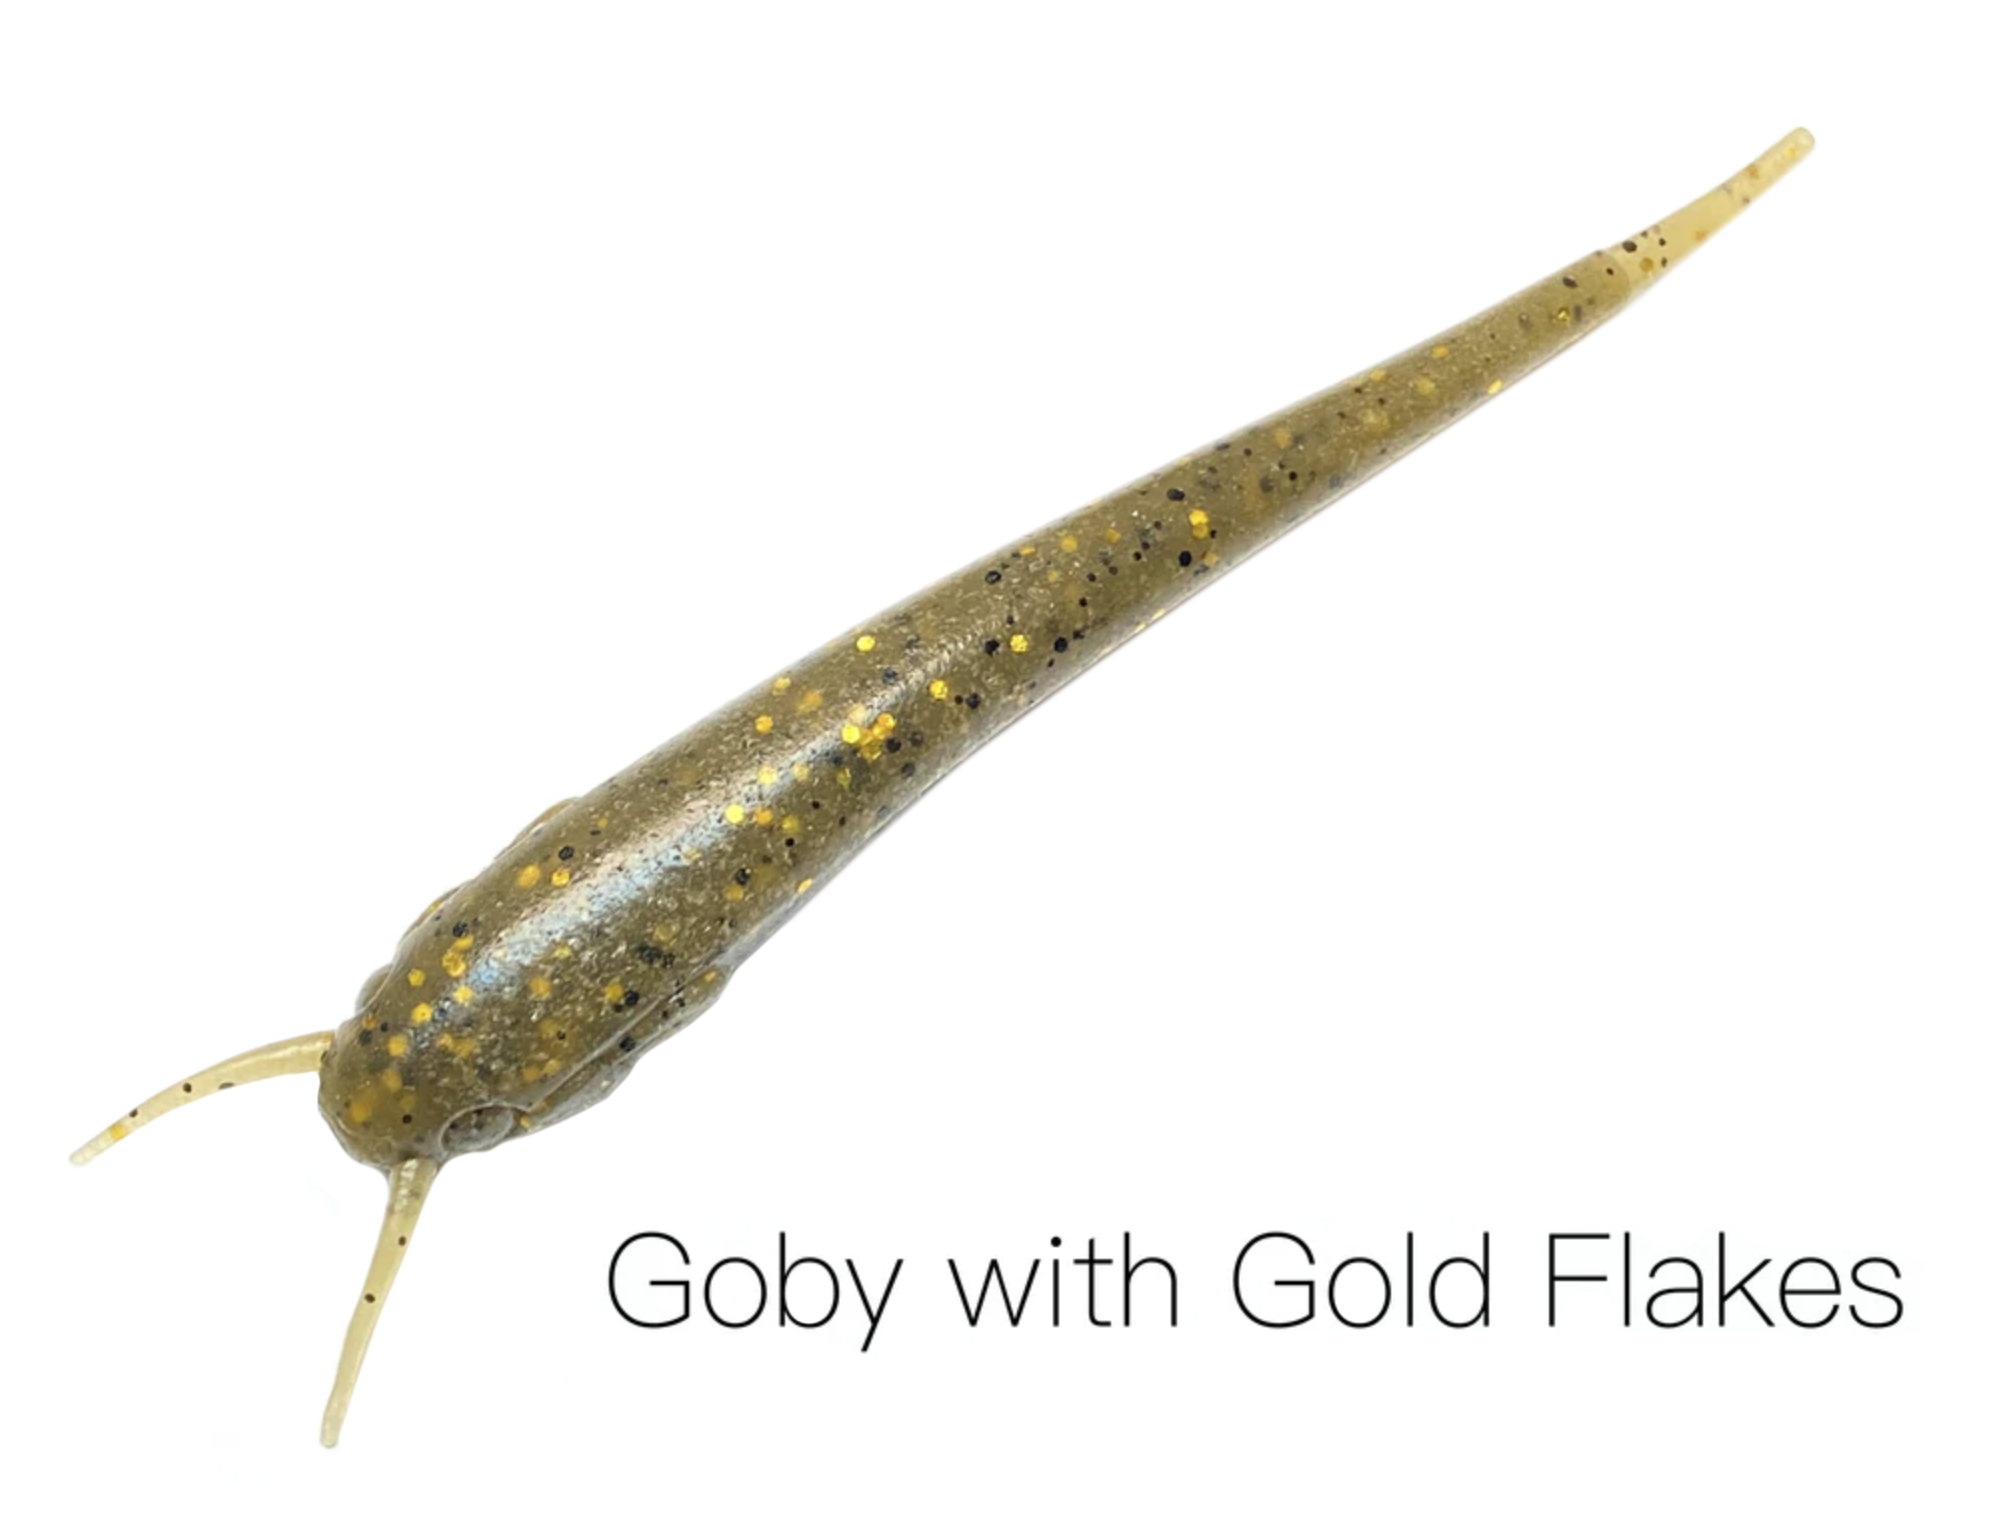 Goby with Gold Flakes